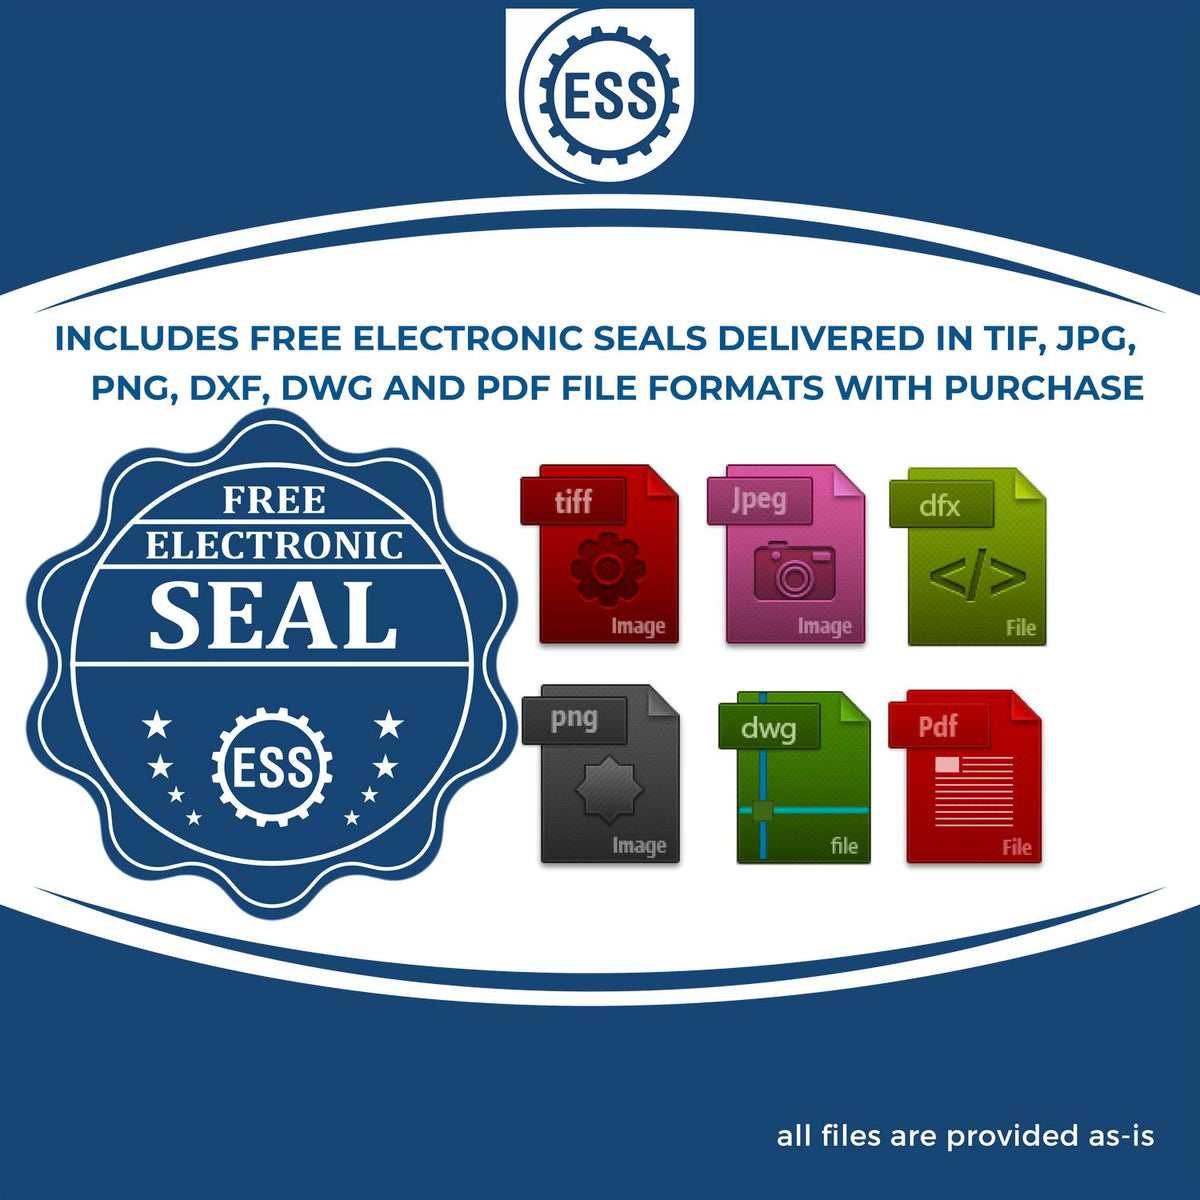 An infographic for the free electronic seal for the Slim Pre-Inked Iowa Professional Engineer Seal Stamp illustrating the different file type icons such as DXF, DWG, TIF, JPG and PNG.